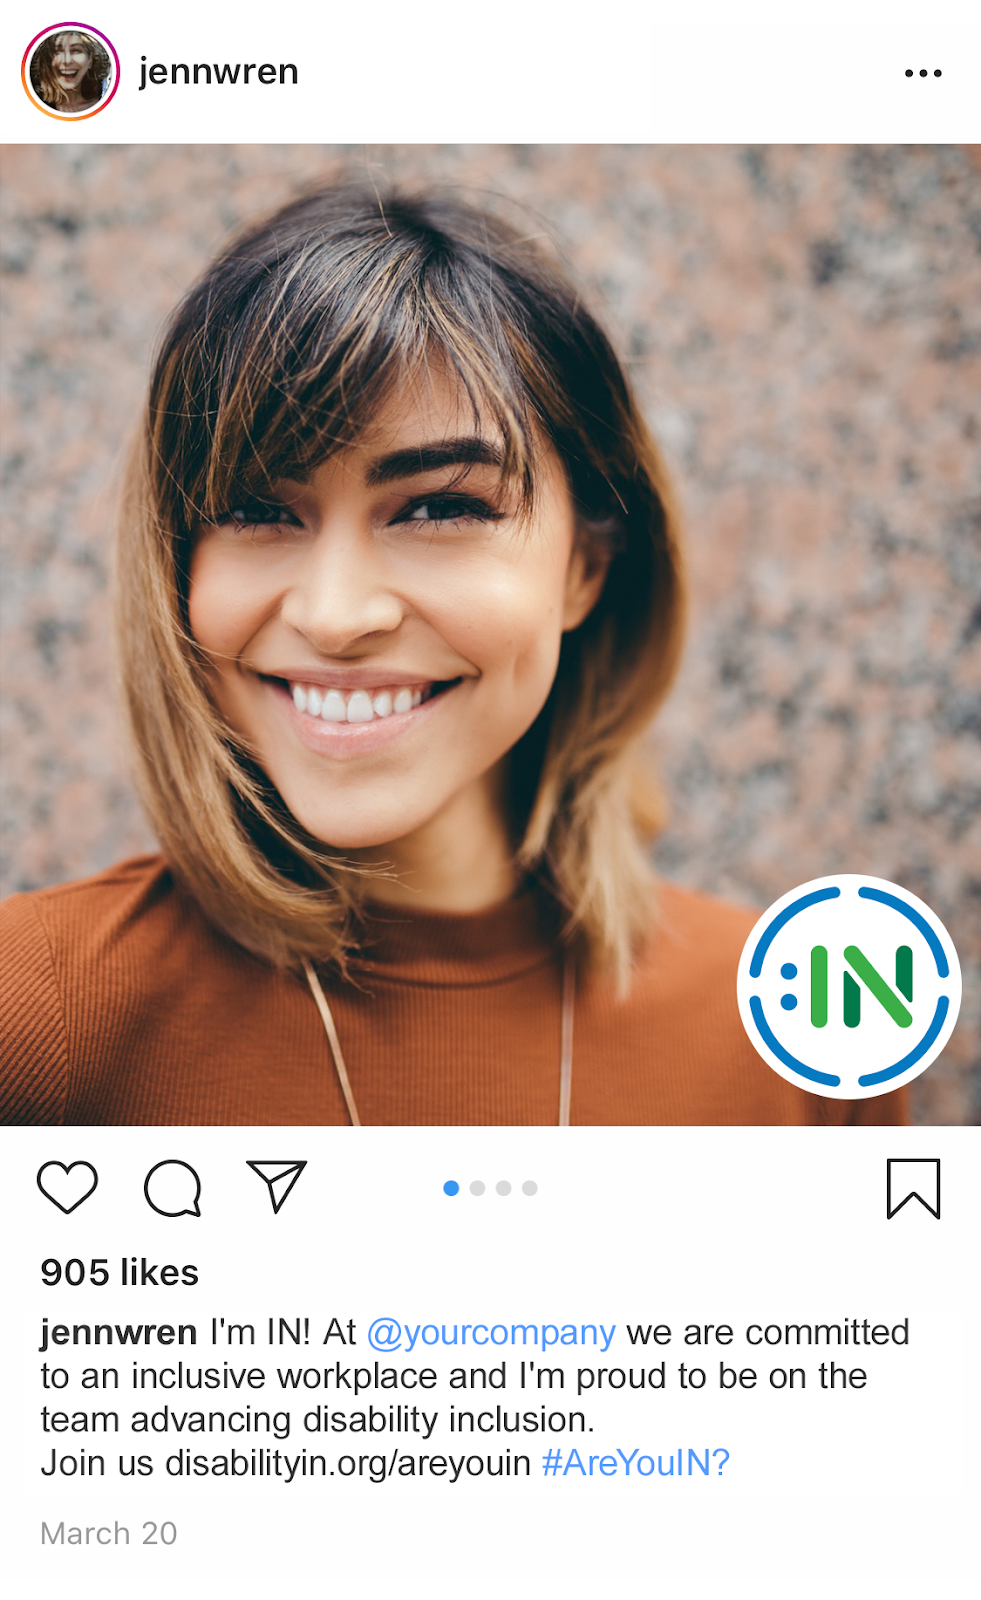 example social media post with woman smiling and "IN" circle stamped on corner